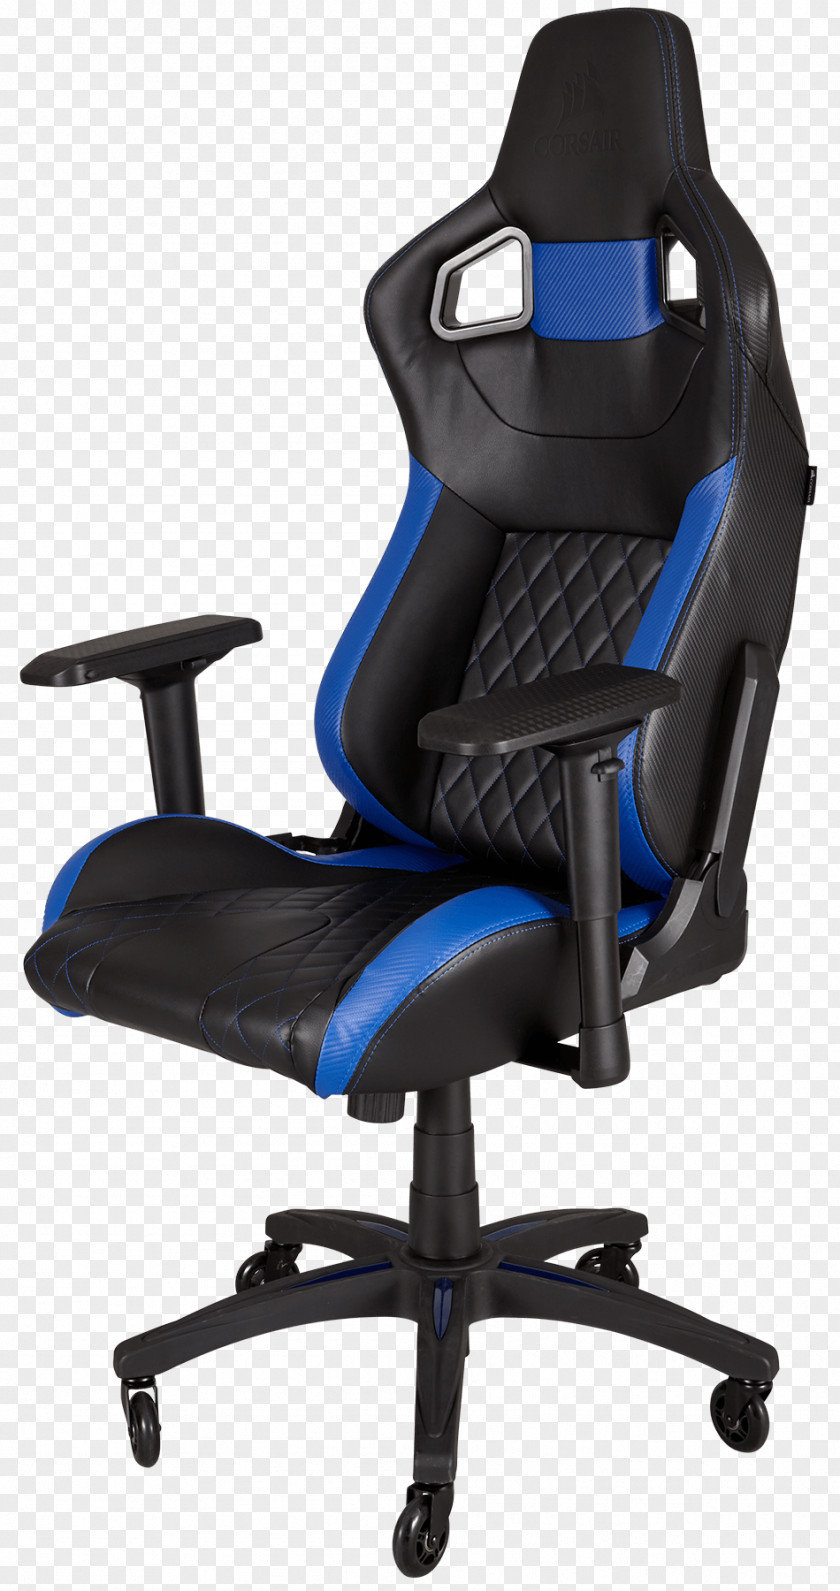 Chair Gaming Office & Desk Chairs Furniture DXRacer PNG